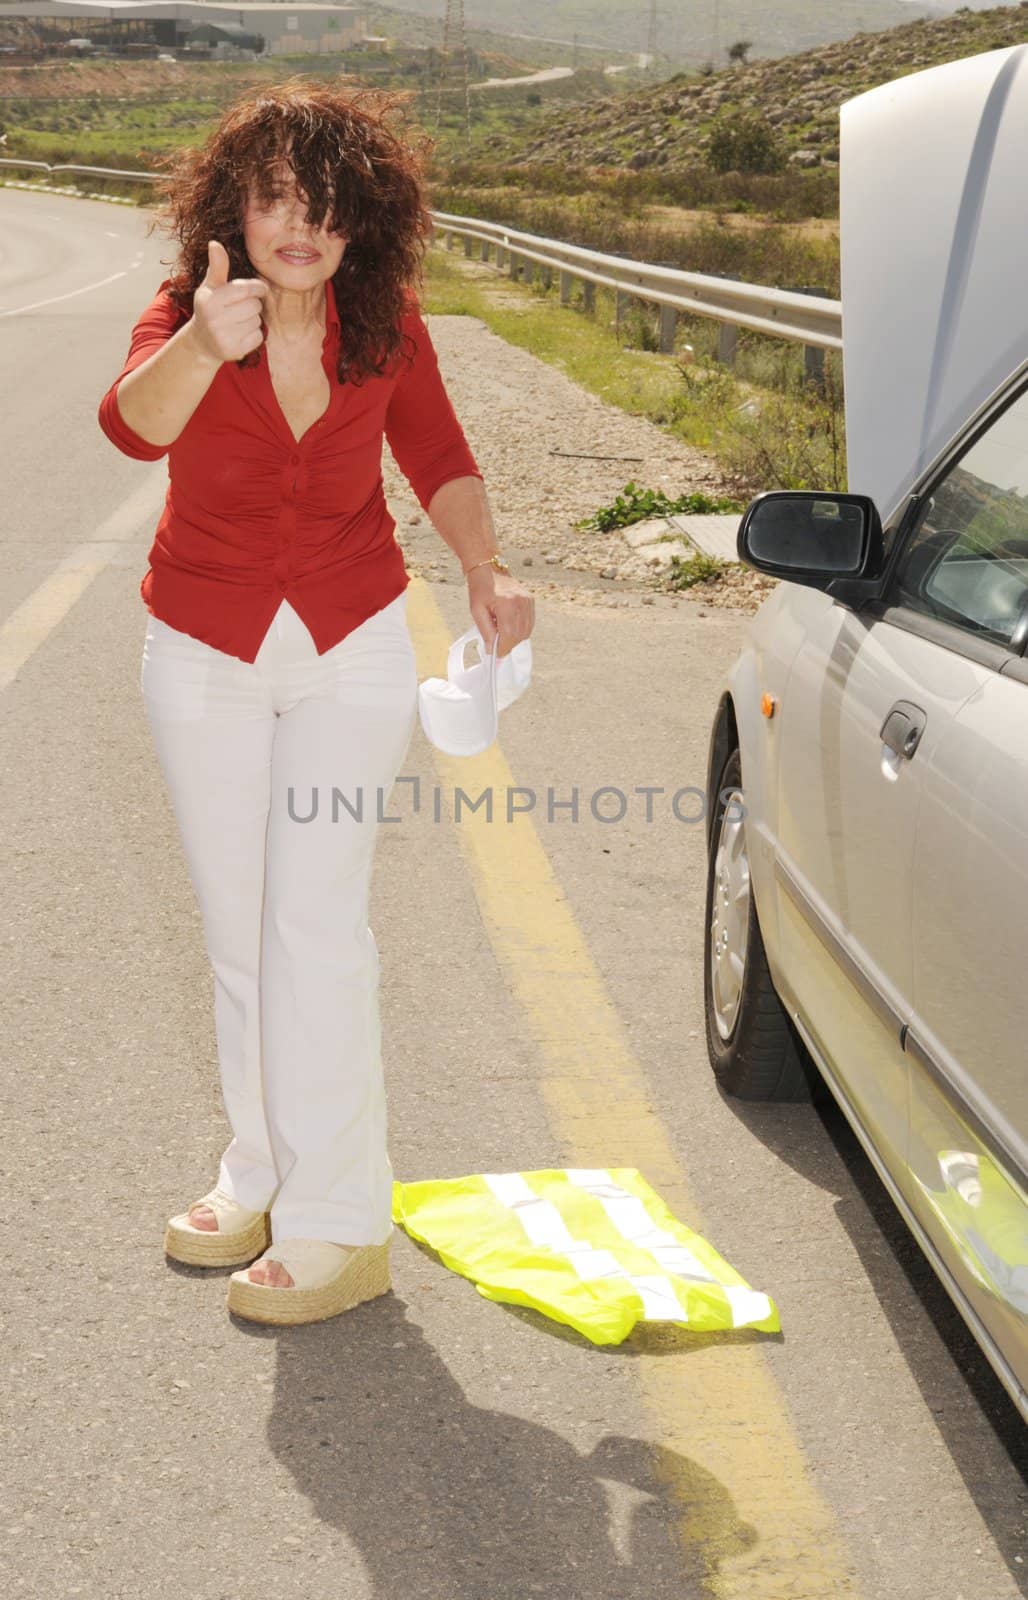 Despaired Elderly Woman Near Her Broken Down Car at the Side of the Road.